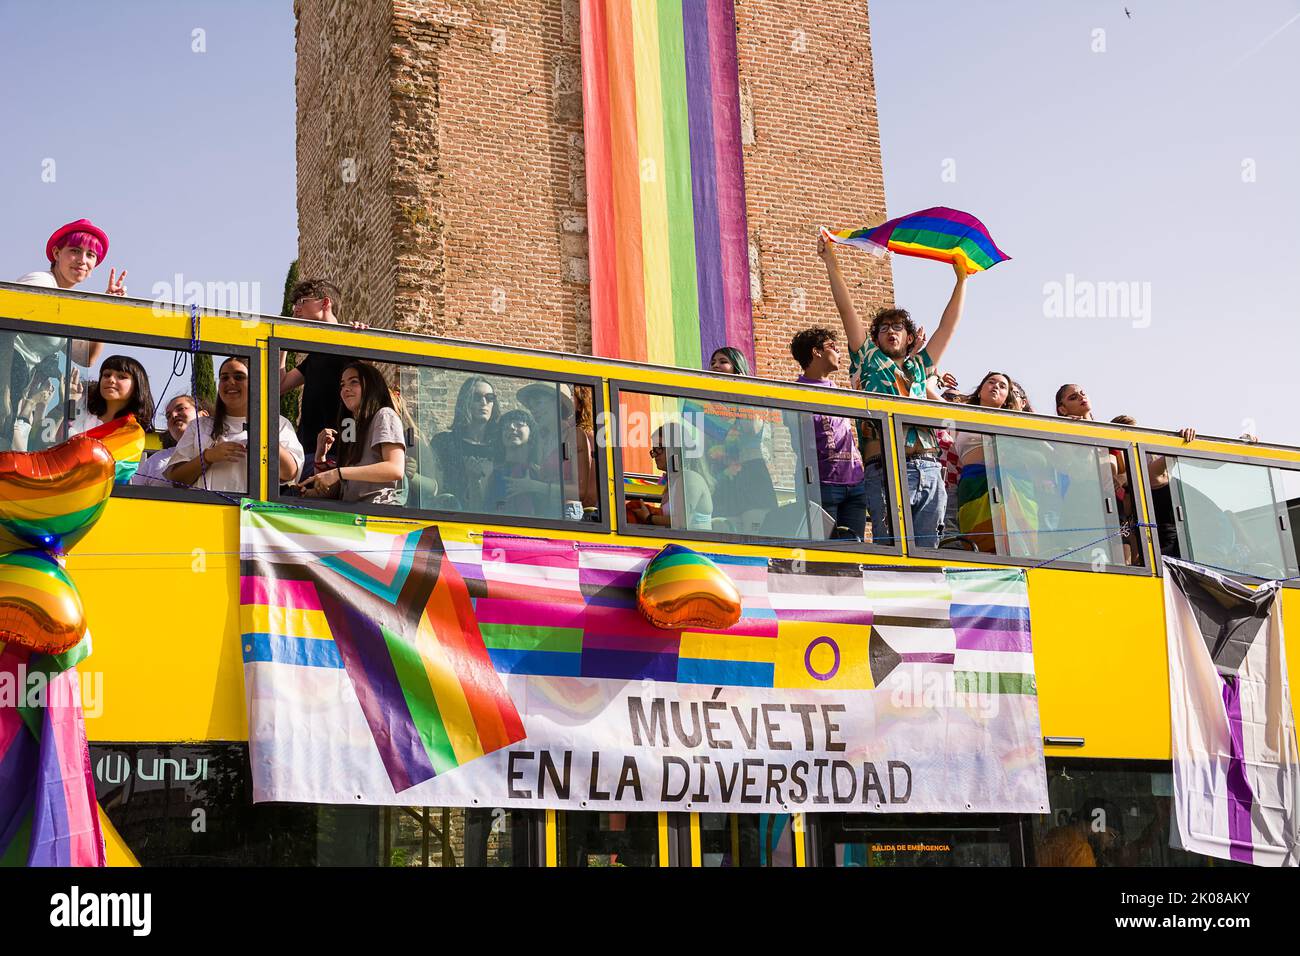 Alcala de Henares, Spain - June 18, 2022: Open bus with LGBTQ protesters for gay pride in front of the Saint Mary Tower Stock Photo